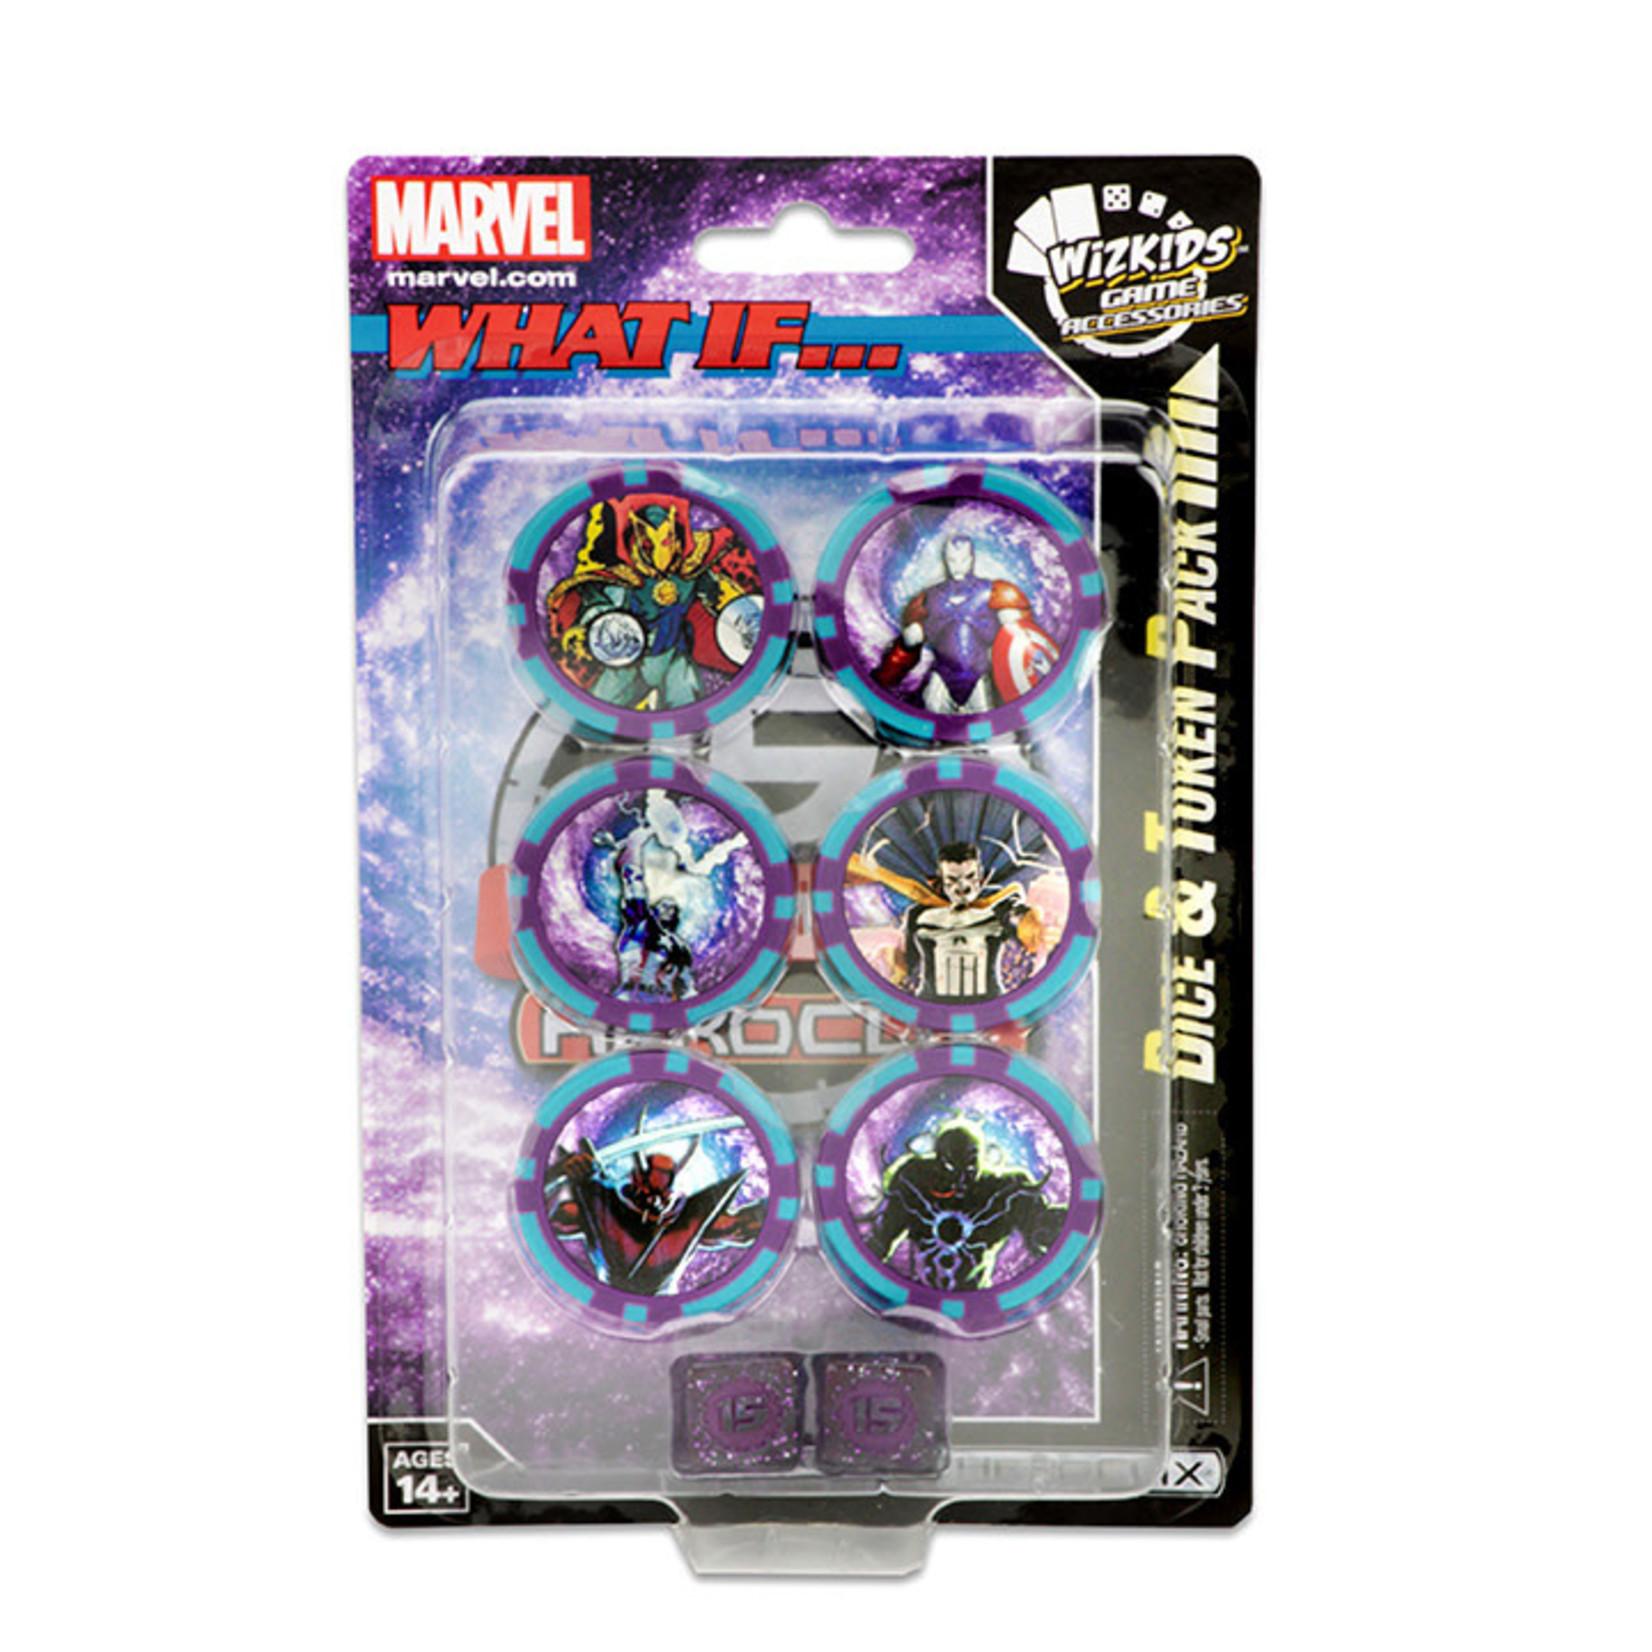 WIZKIDS/NECA MHeroClix 15th A What If? Dice and Token Pack